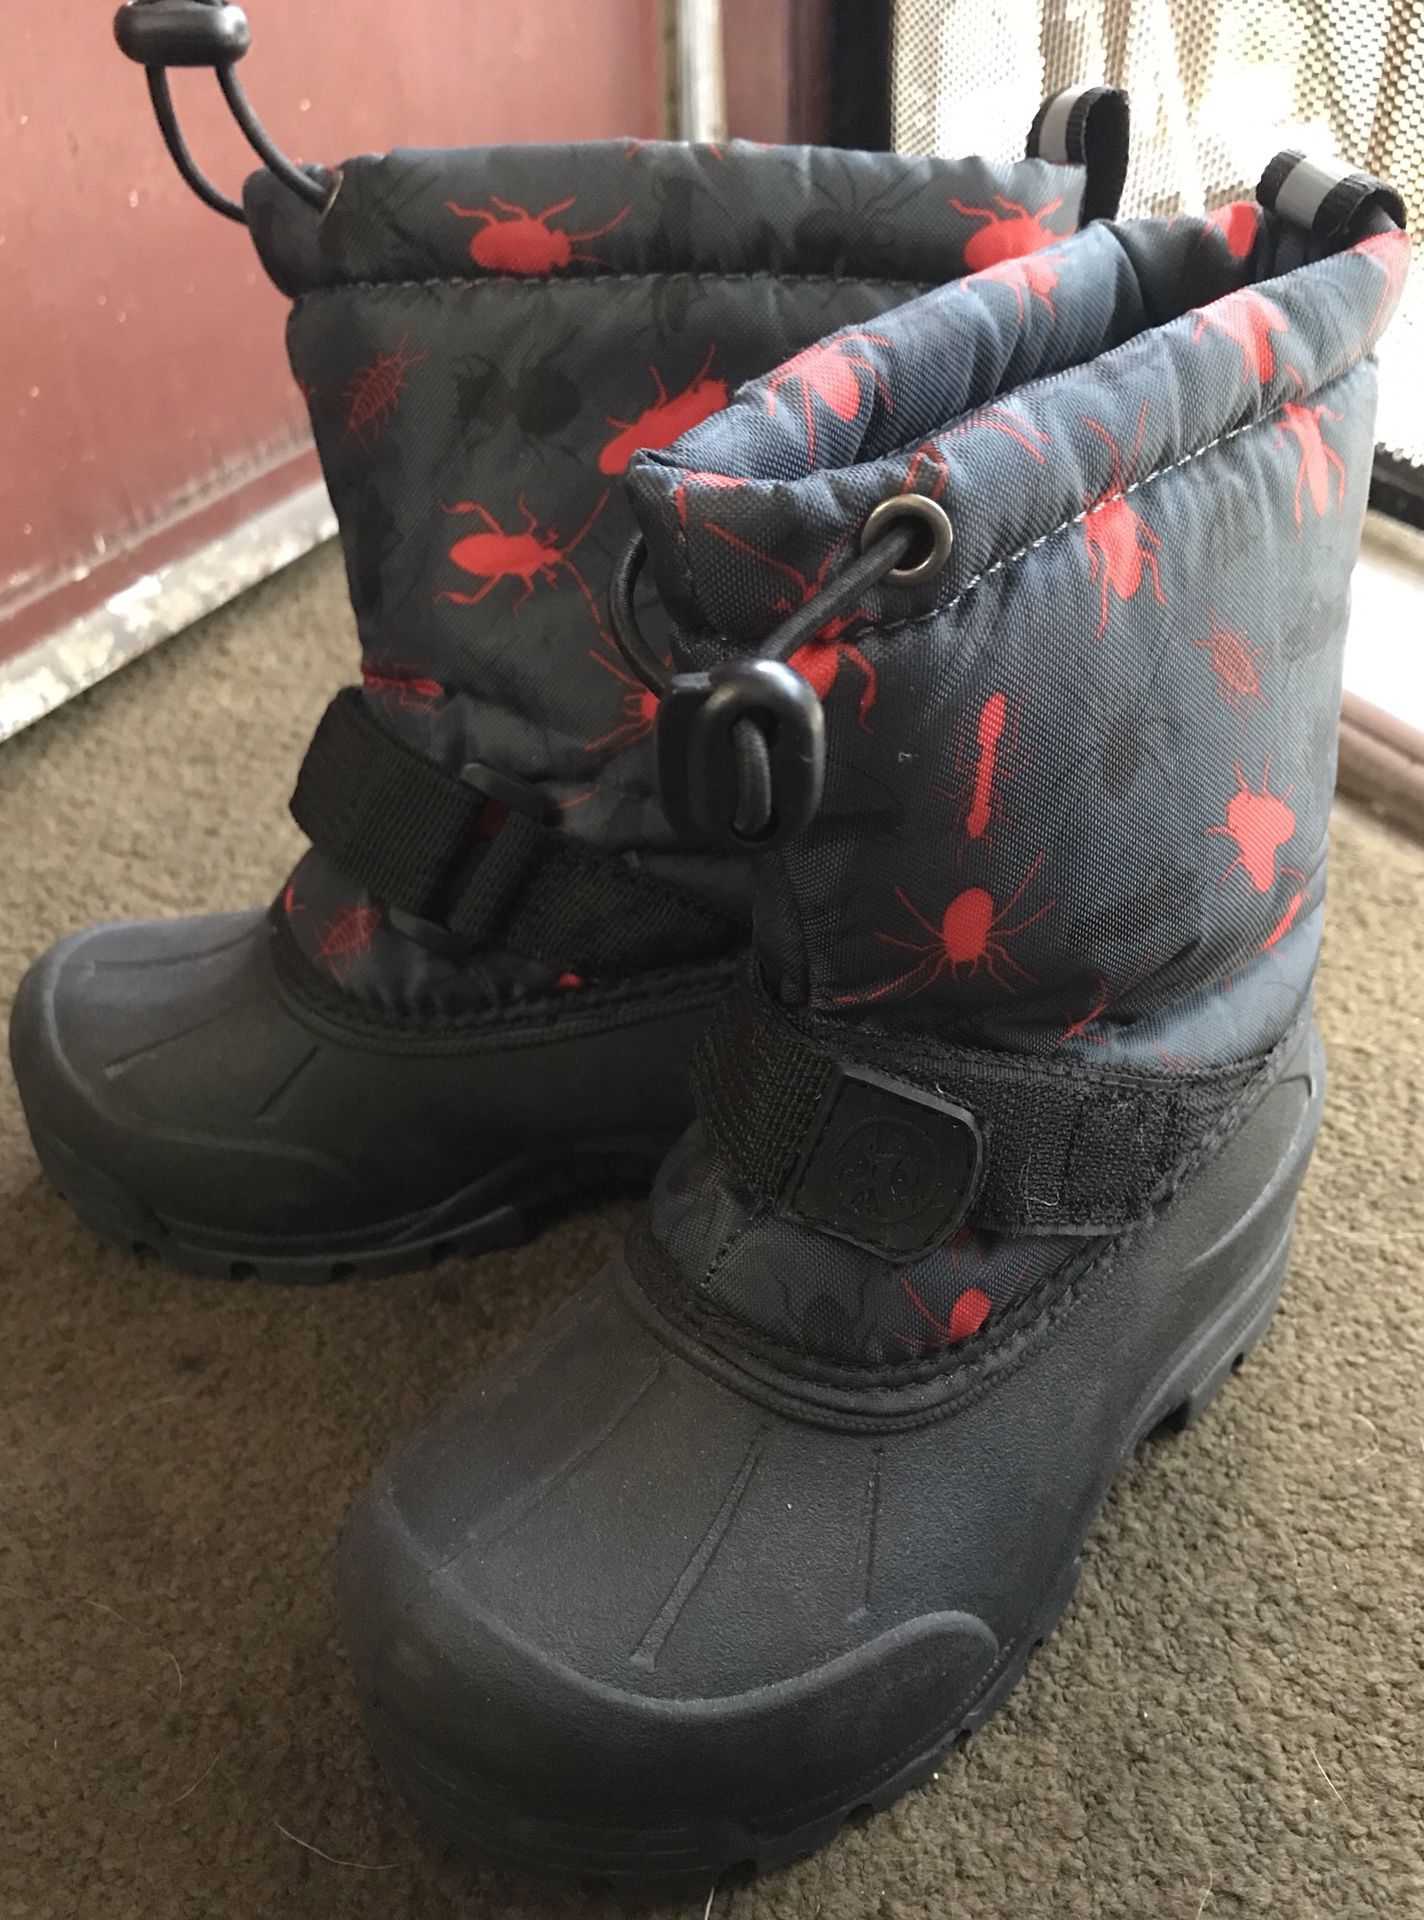 Kids weather boots for snow, rain Size 11